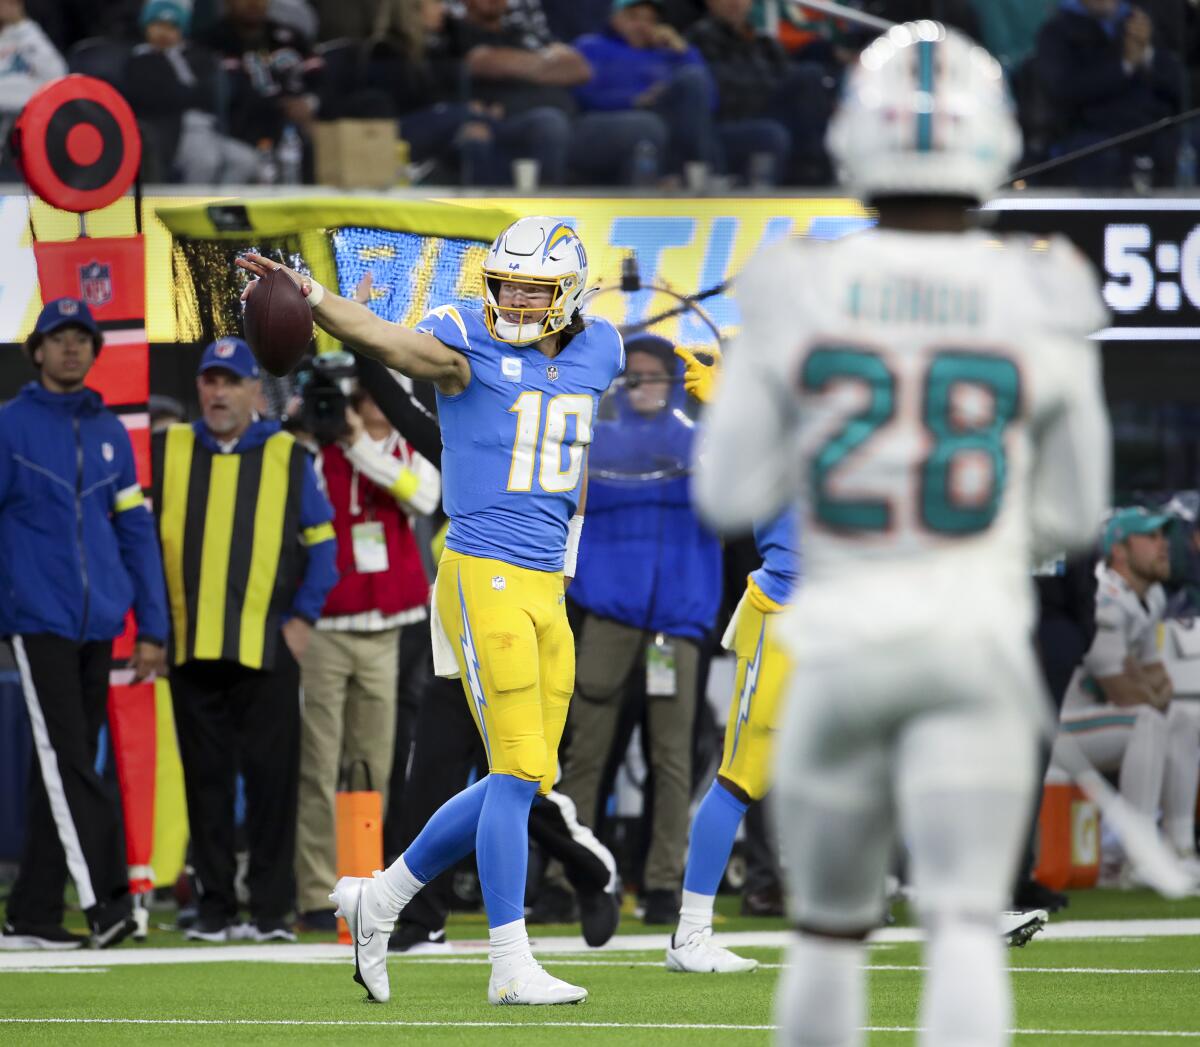 Chargers quarterback Justin Herbert signals first down after his run against the Dolphins.